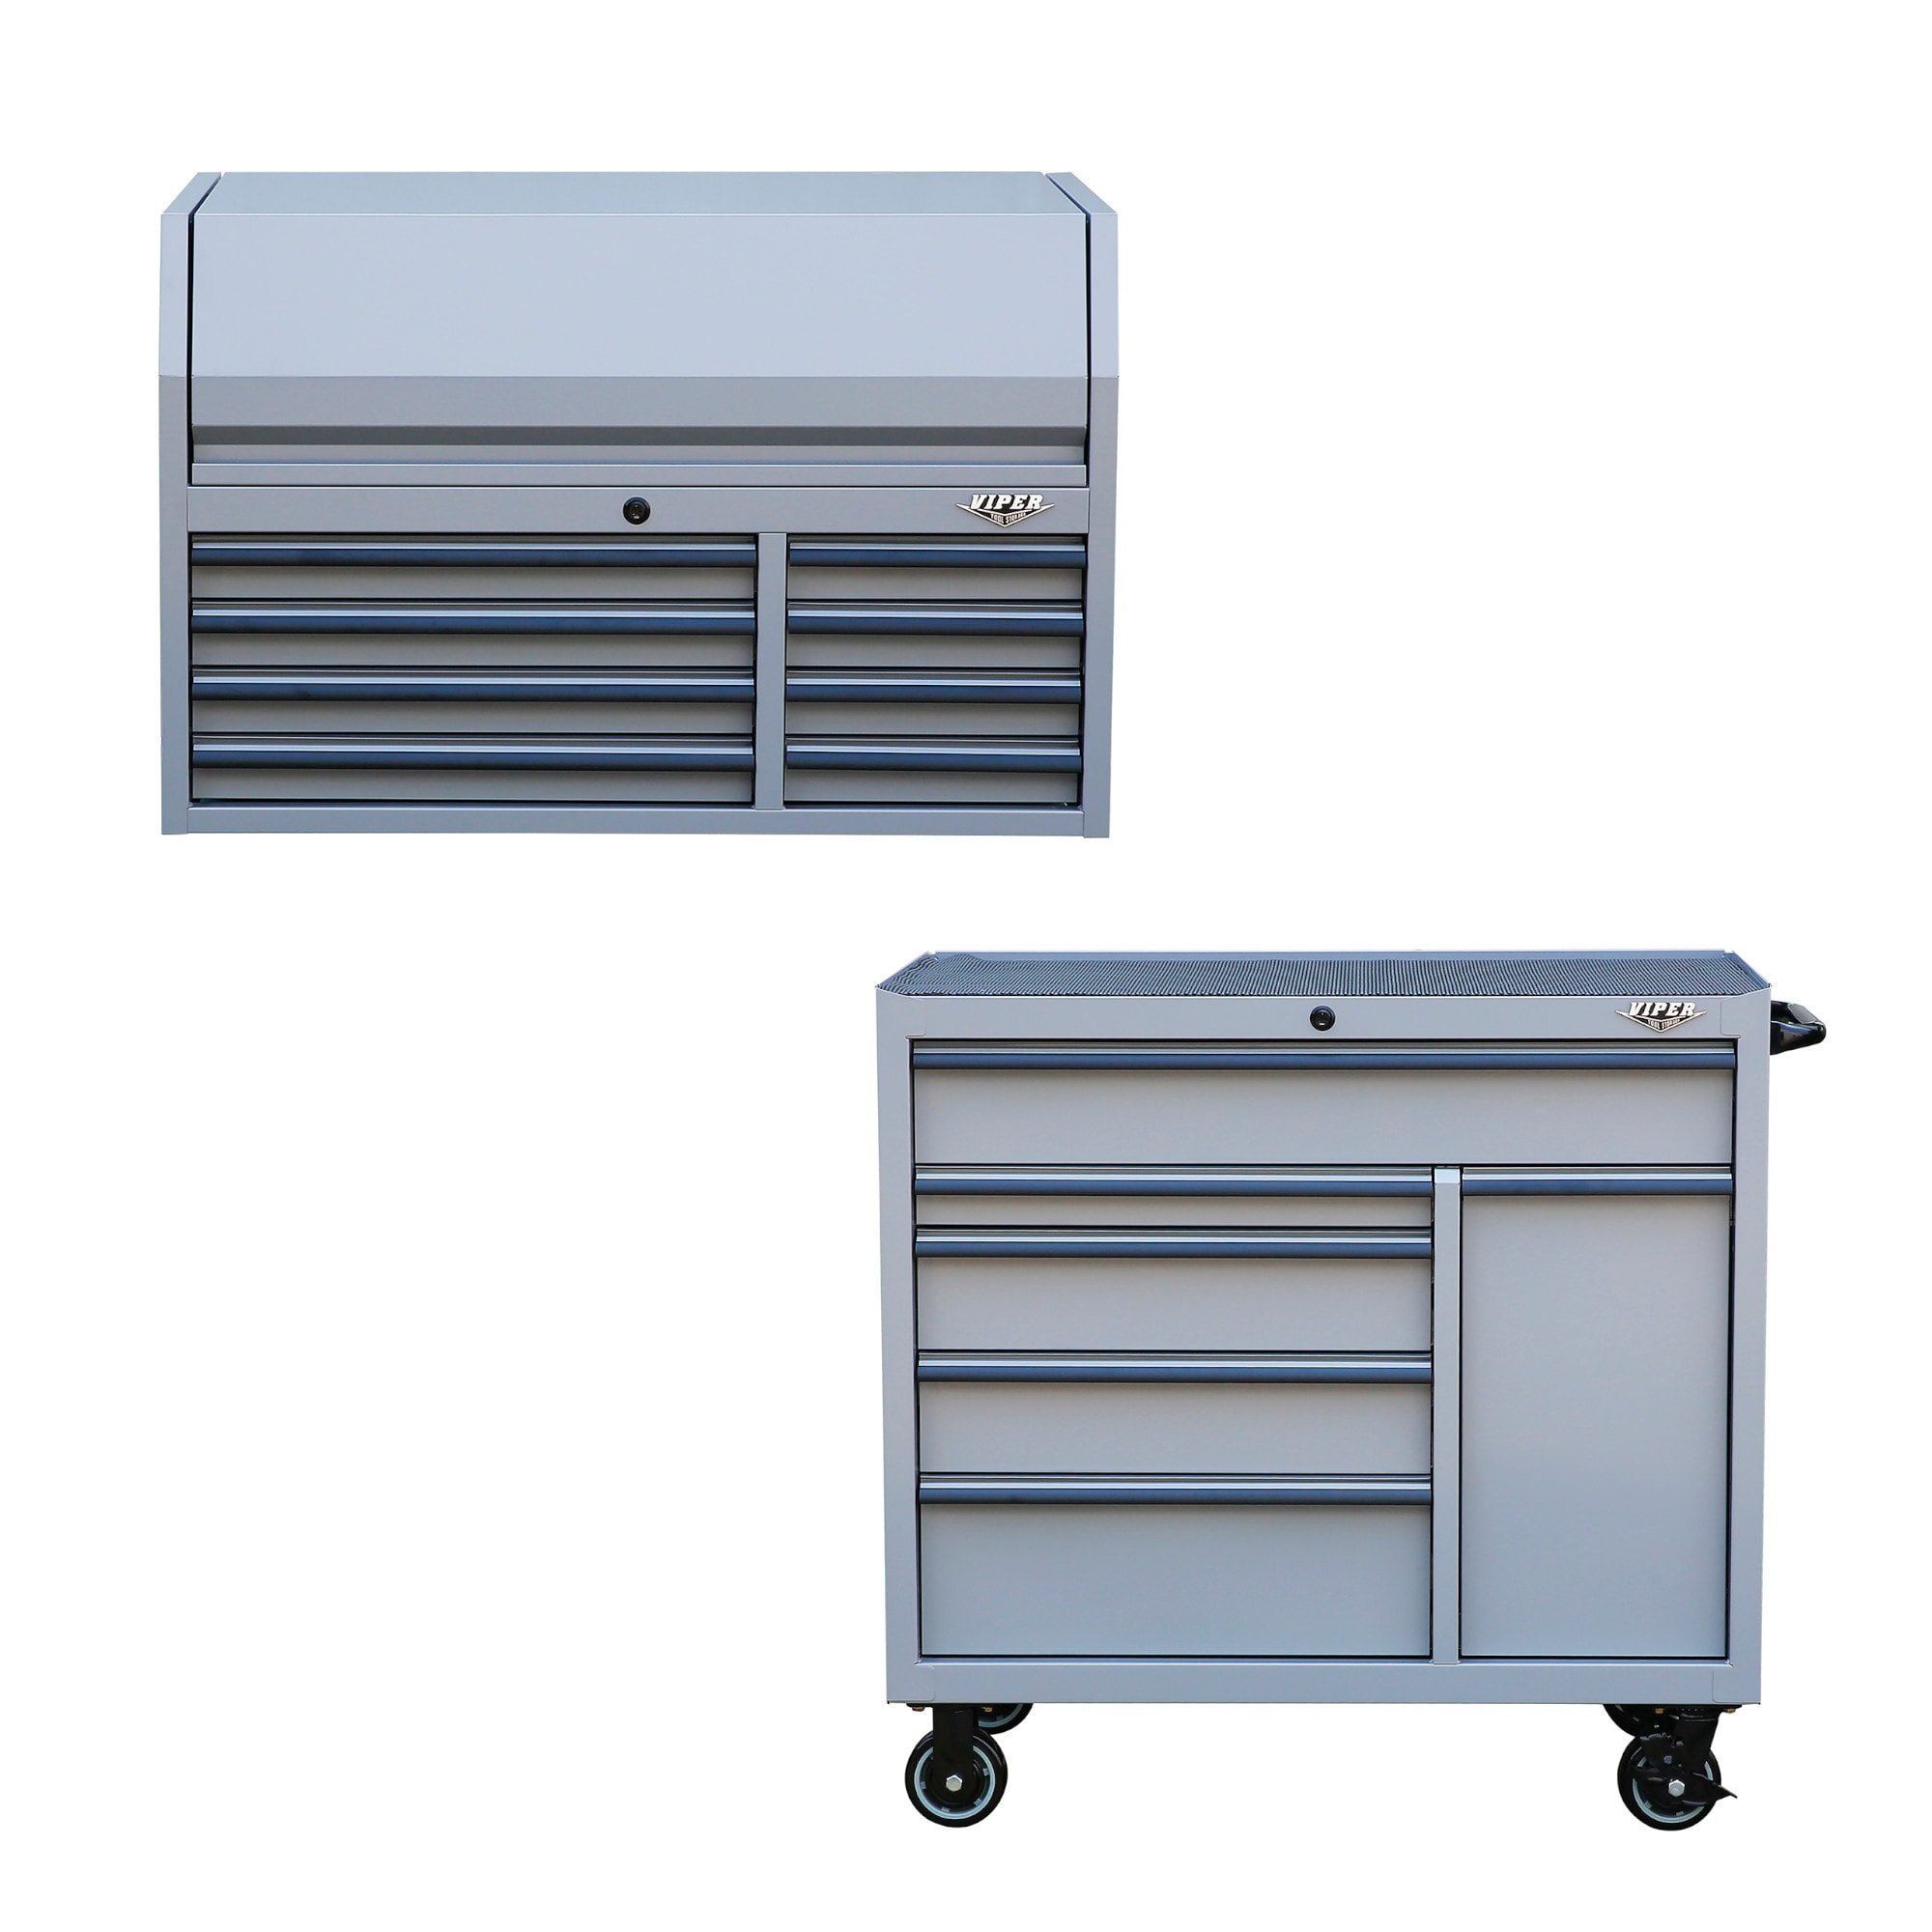 Viper Tool Storage Viper 41-Inch Top and Bottom Steel Rolling Cabinet Combo Sonic Gray